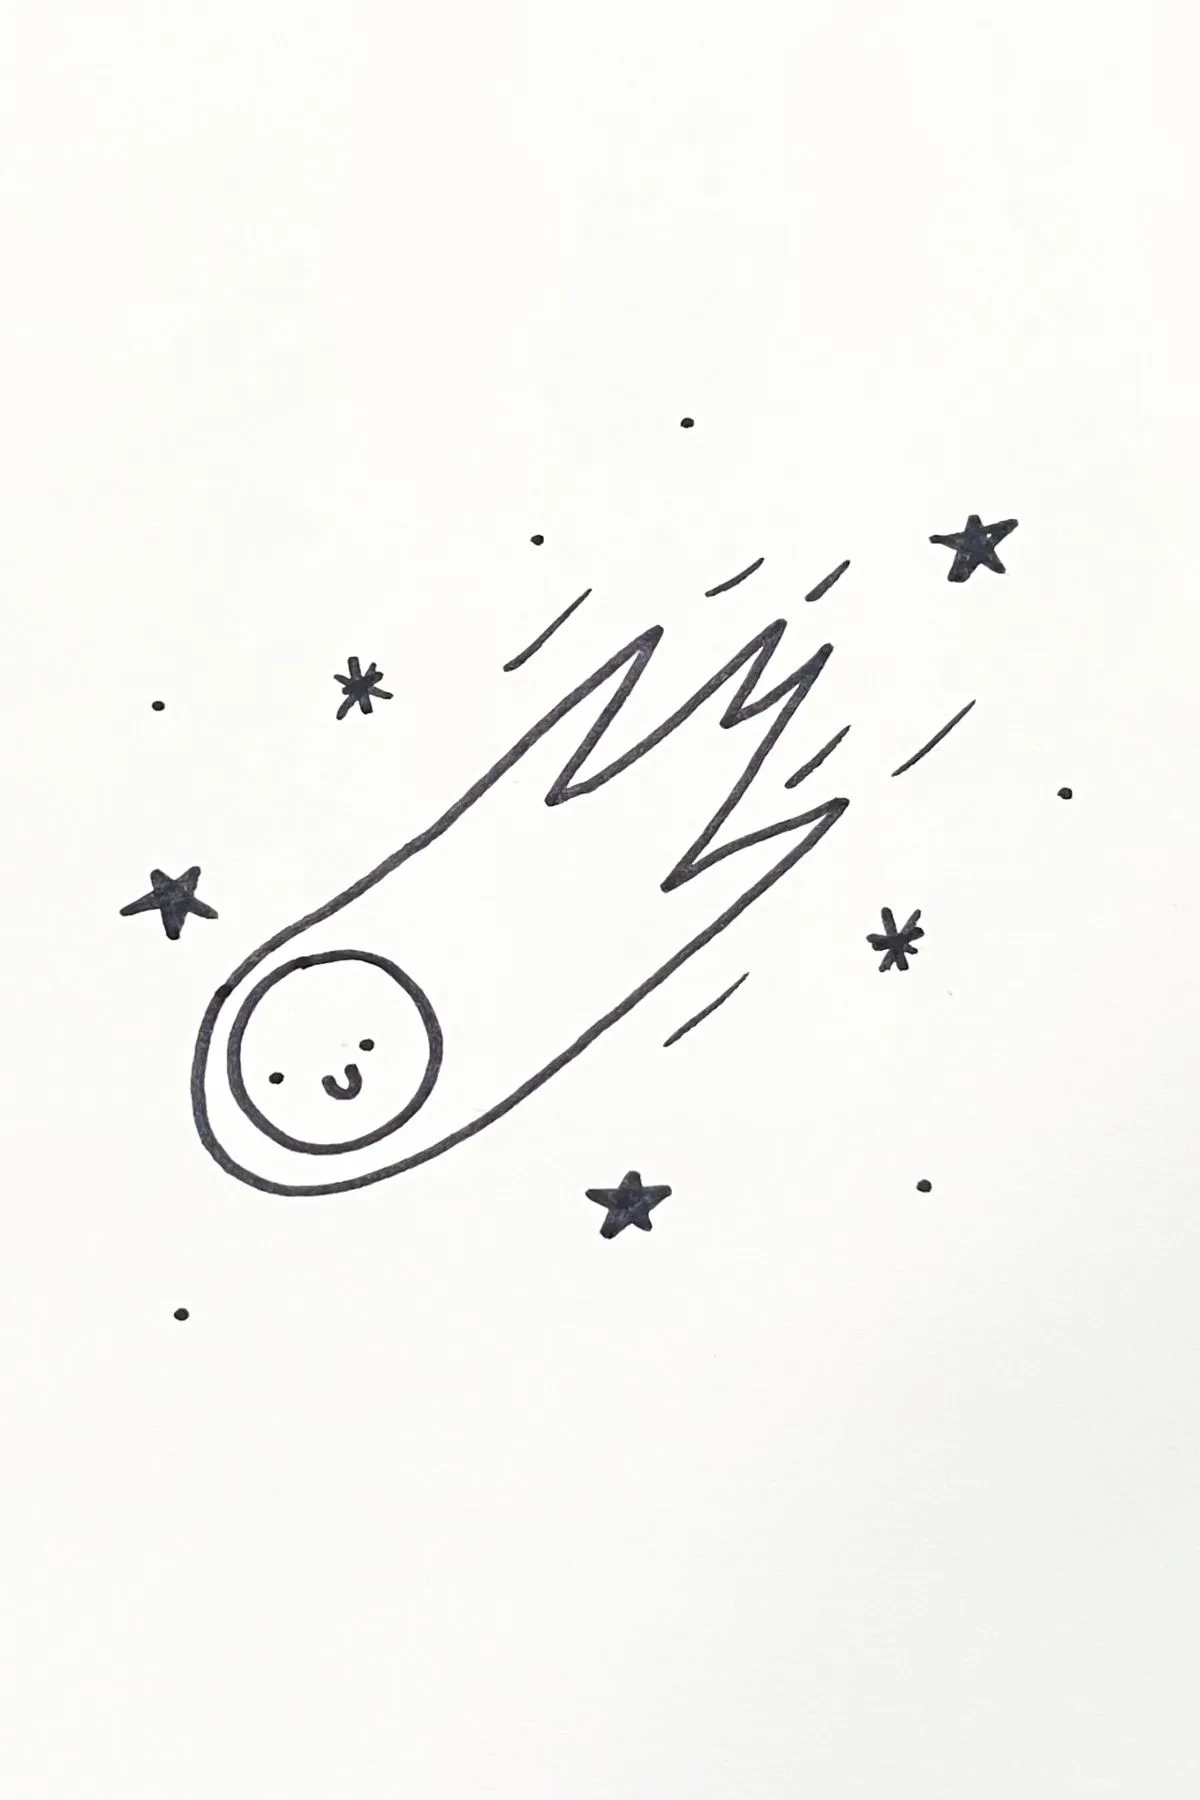 smiling asteroid drawing ideas